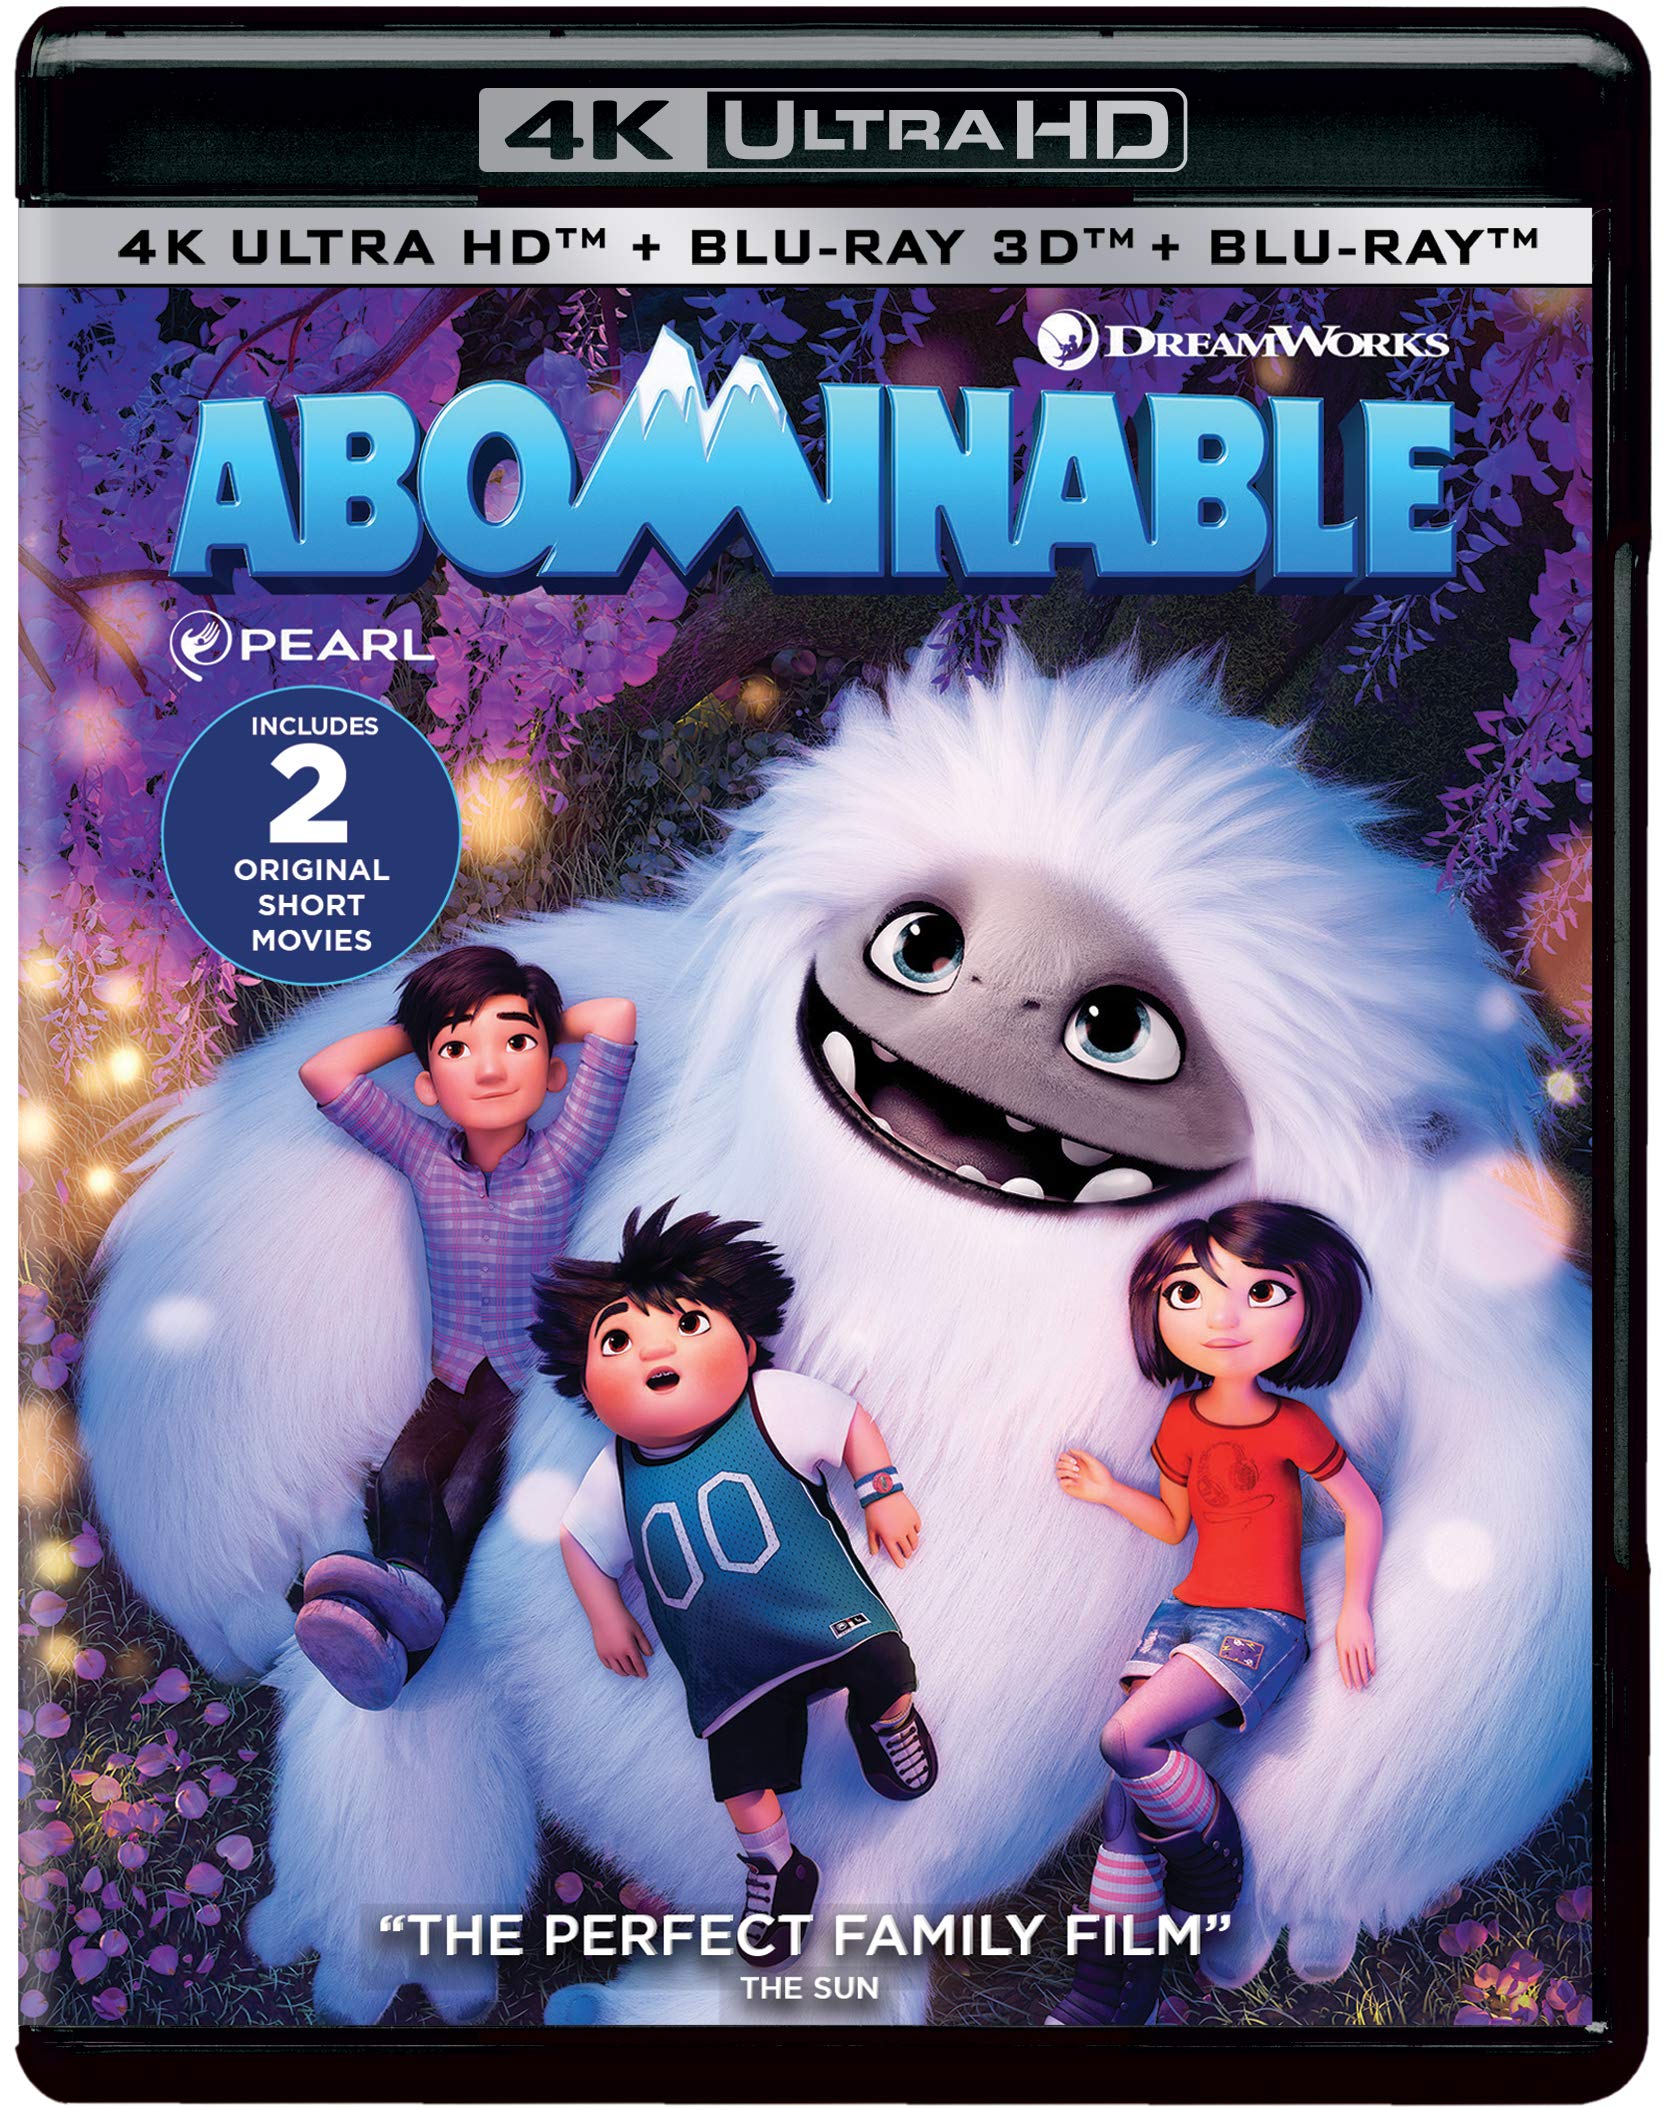 abominable-4k-uhd-blu-ray-3d-blu-ray-3-disc-movie-purchase-or